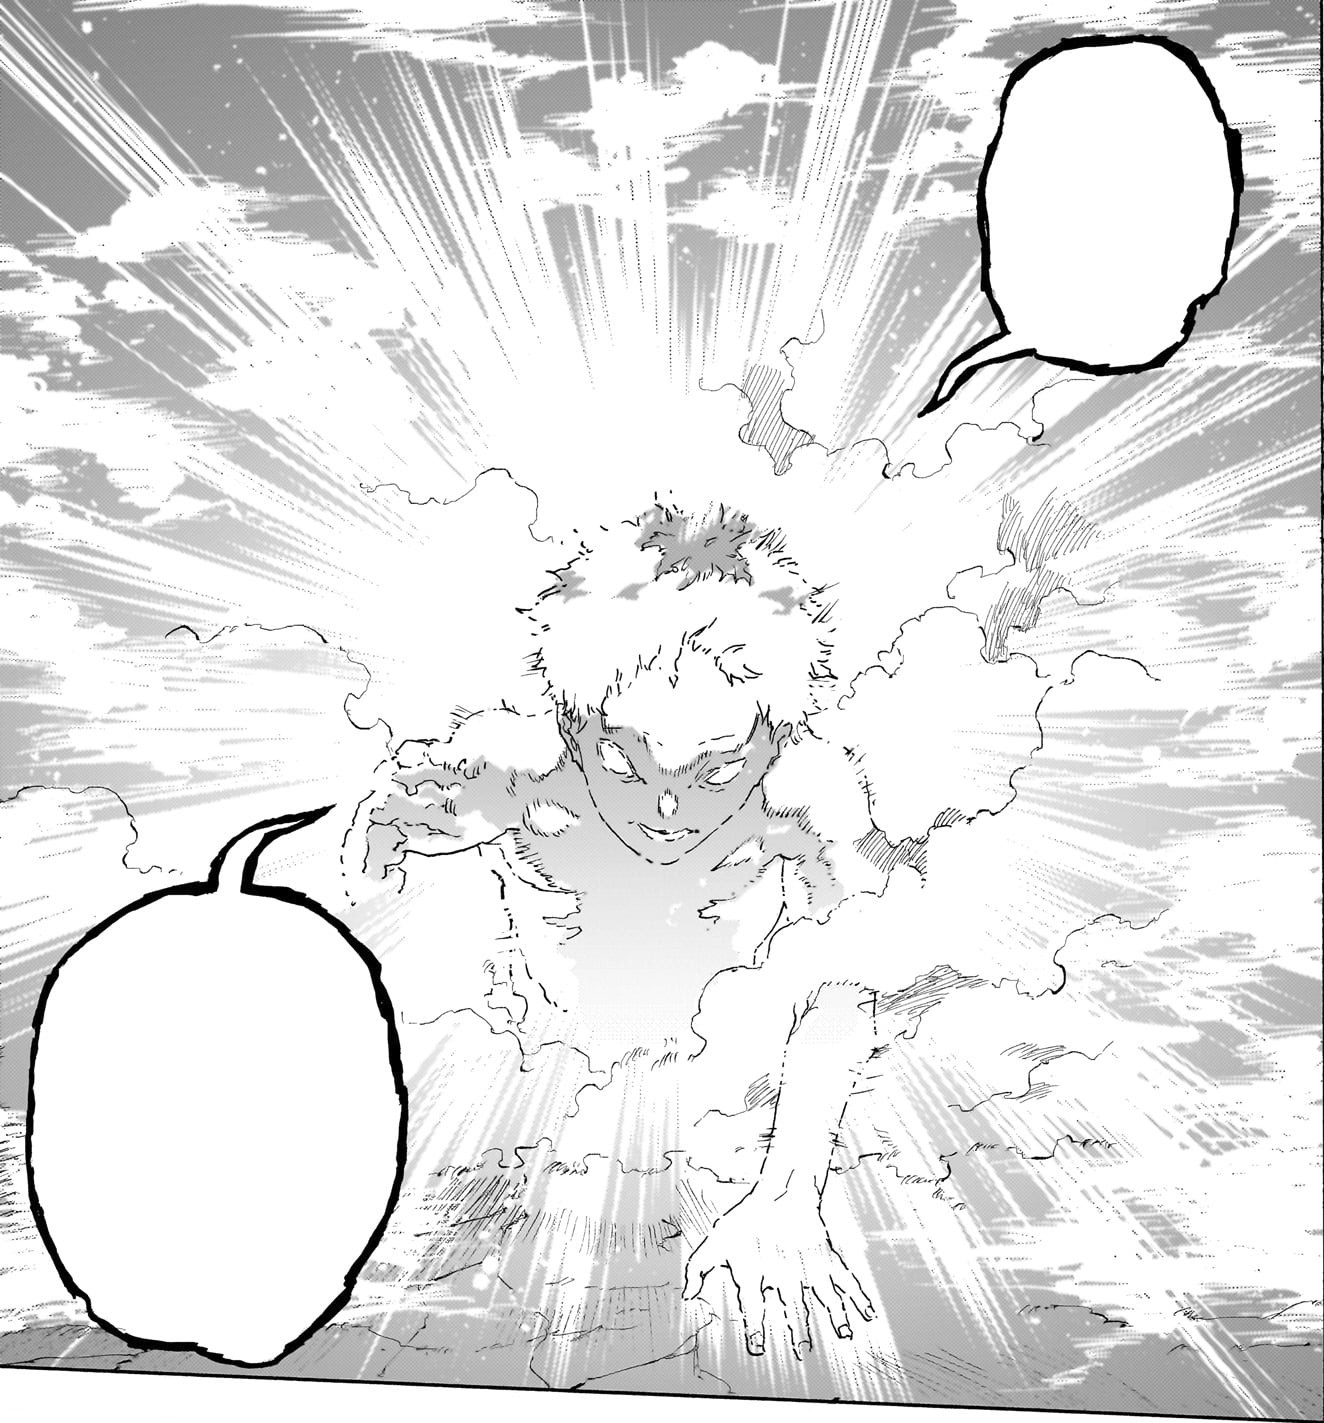 My Hero Academia chapter 362 raw scans and spoilers: Bakugo's final attack  on AFO leads to a tragedy